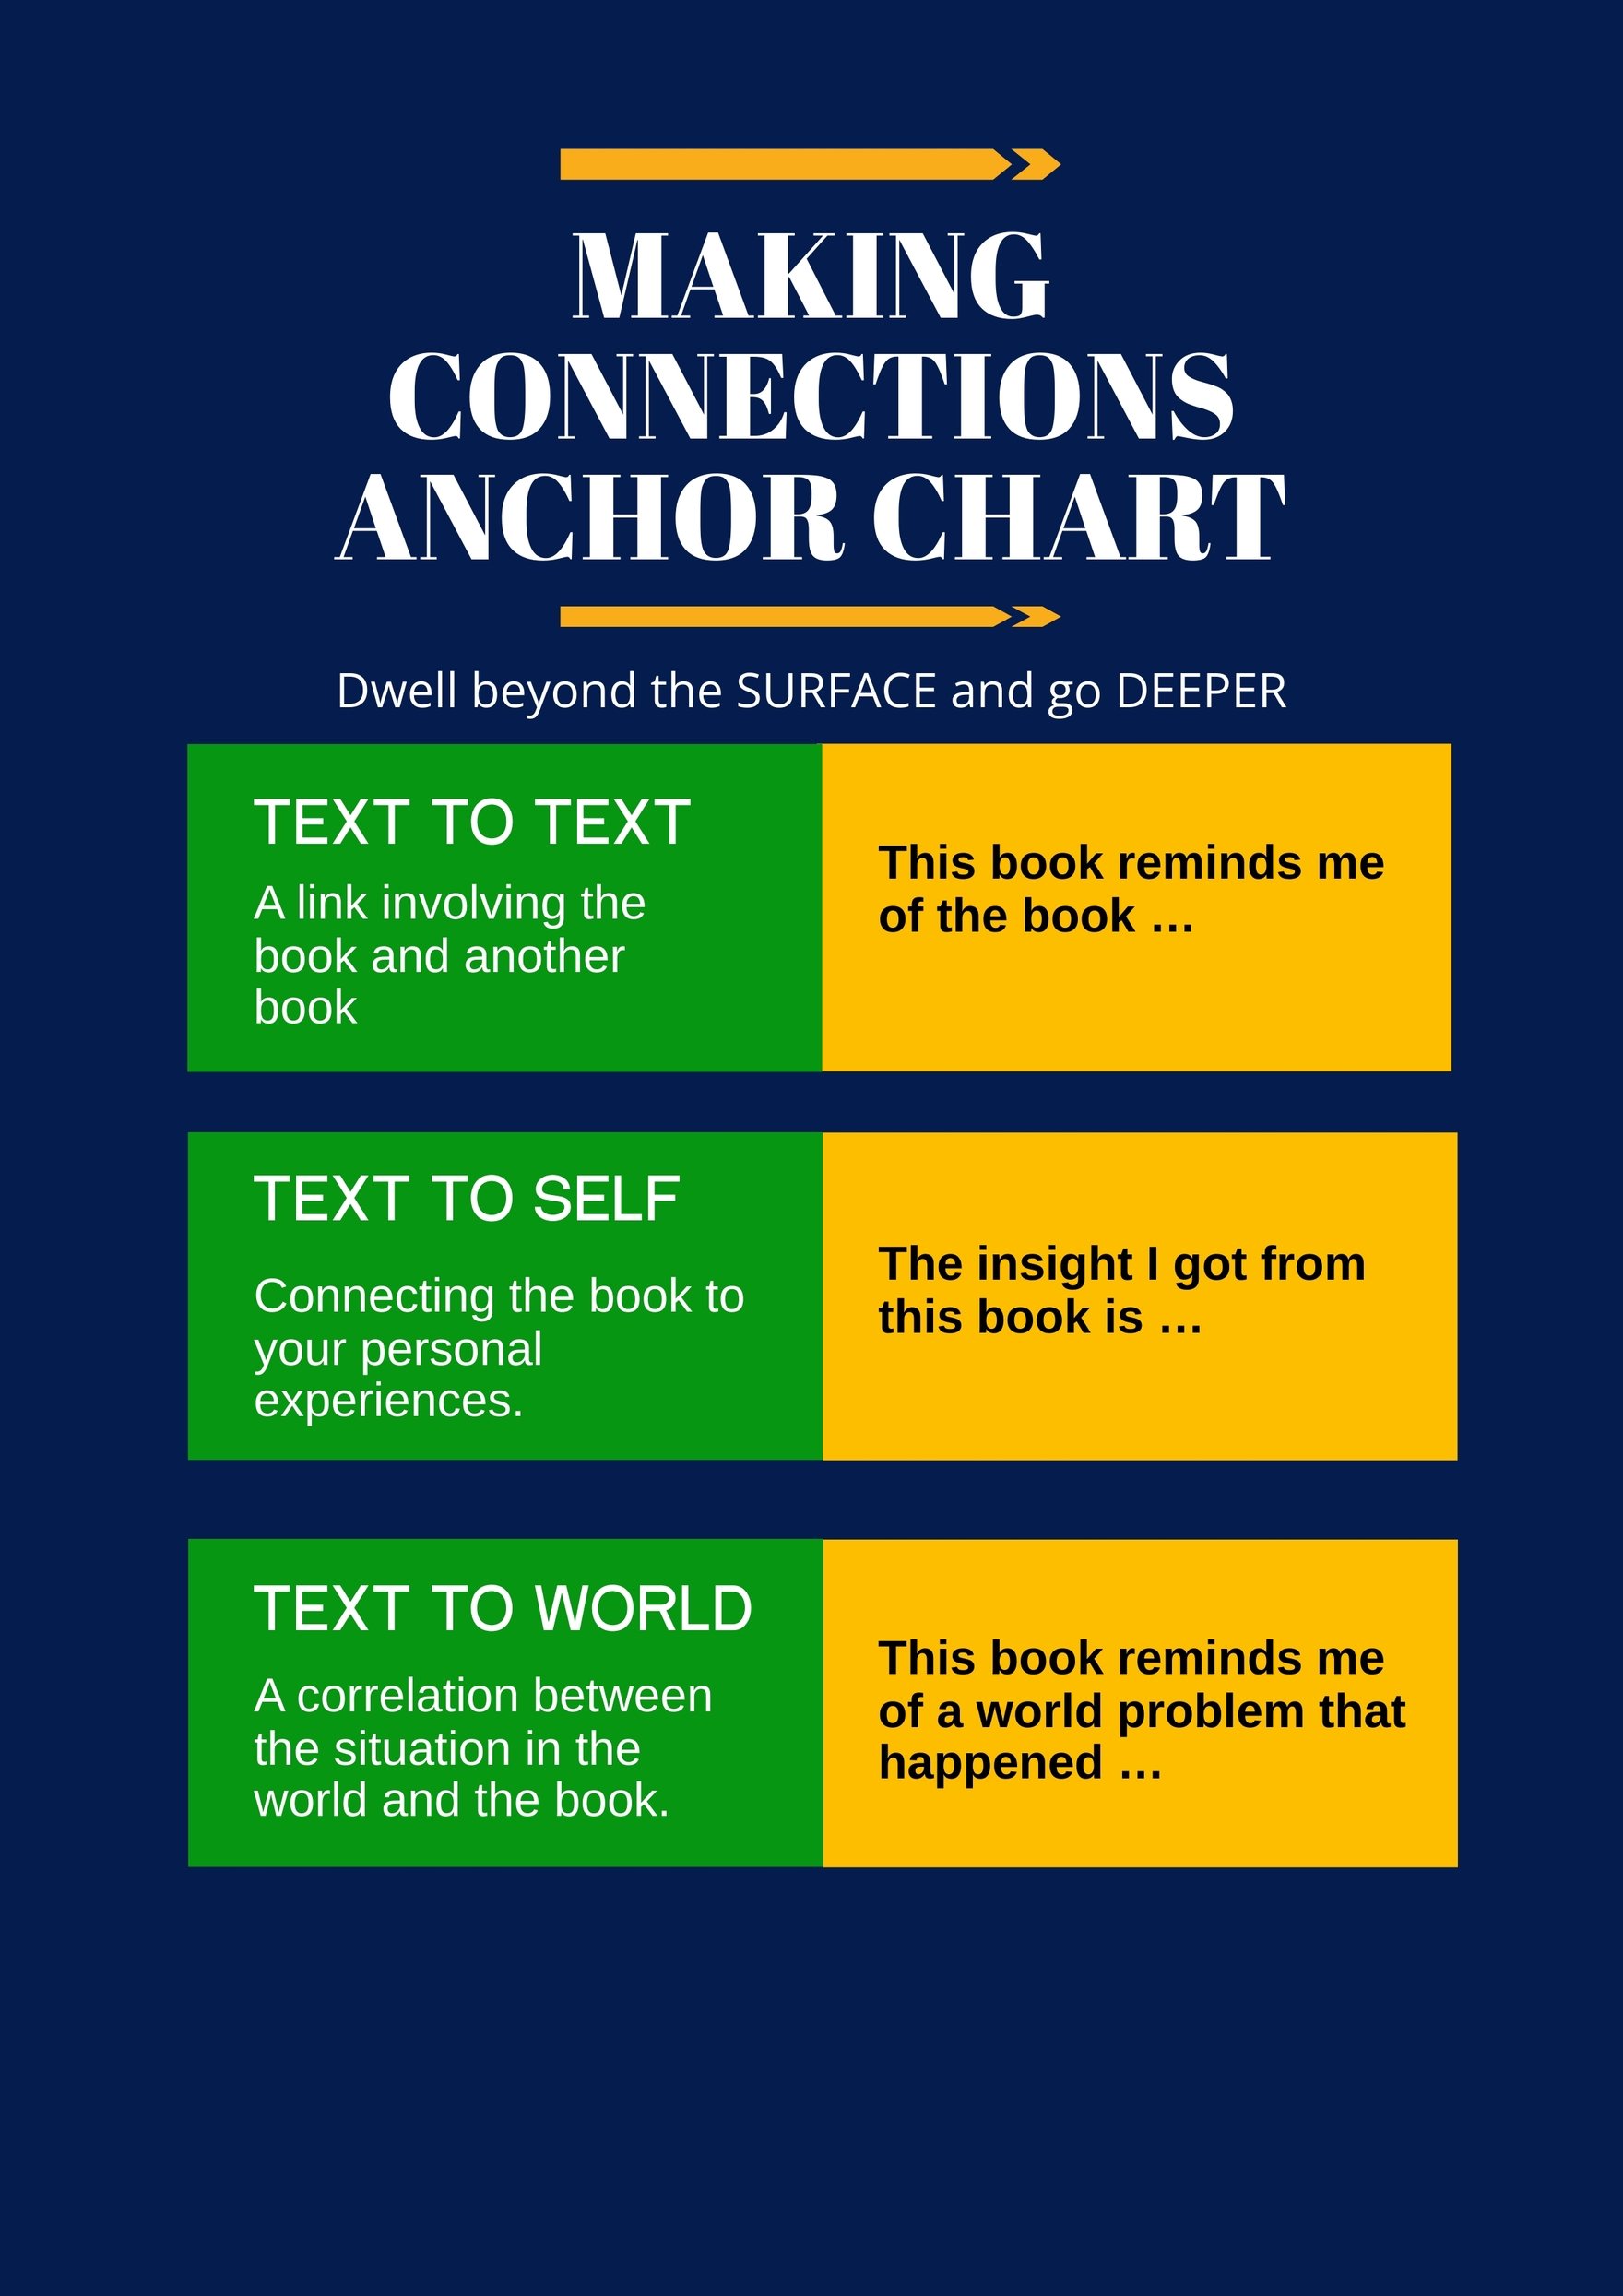 Making Connections Anchor Chart in PDF, Illustrator